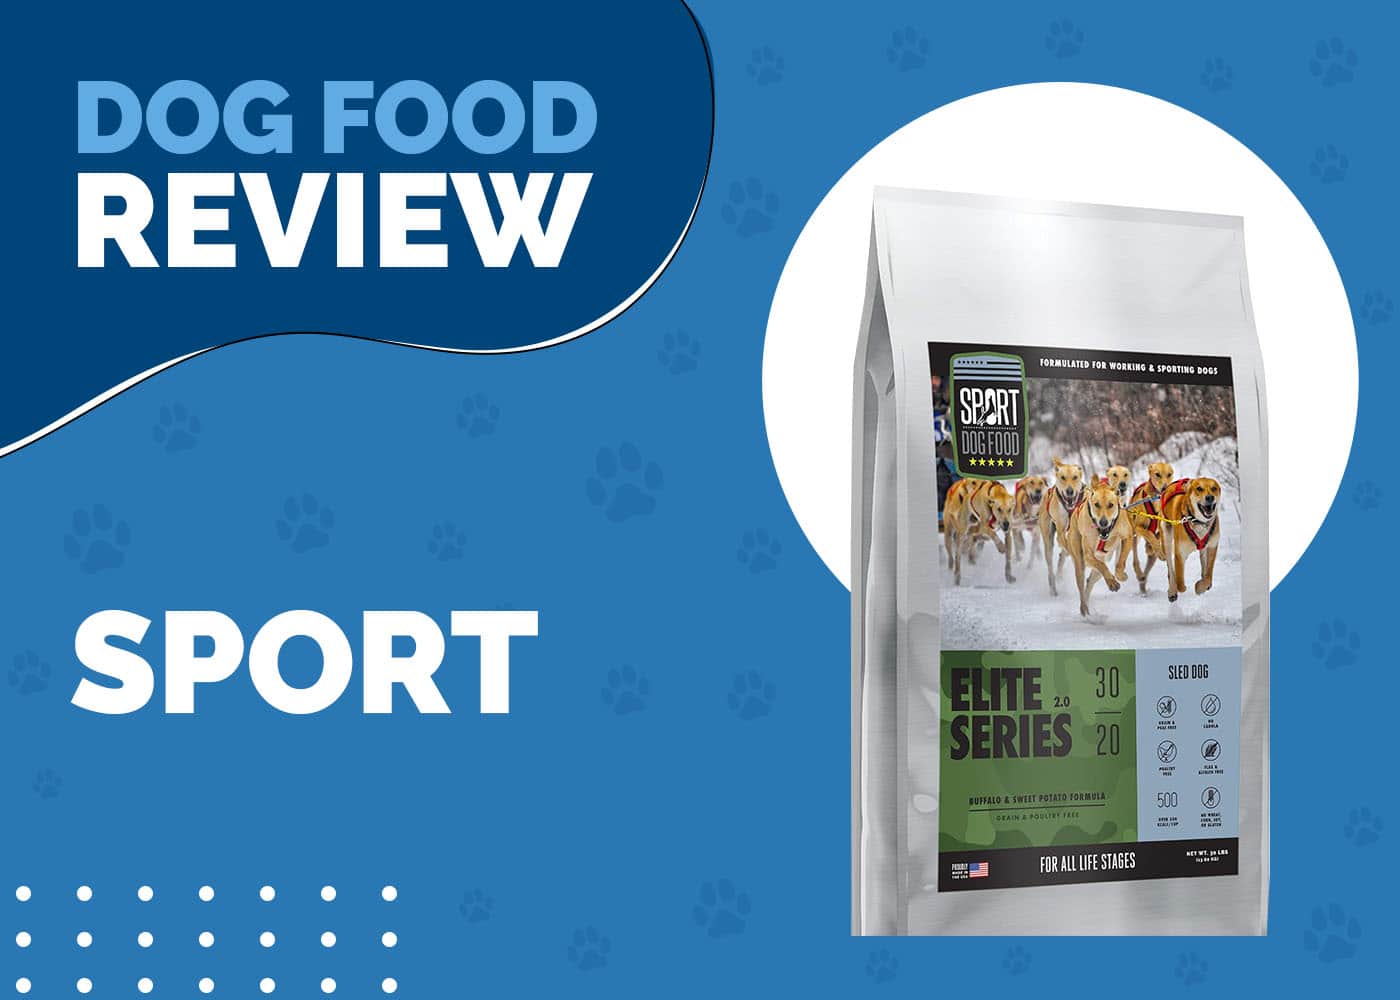 Sport Dog Food Review